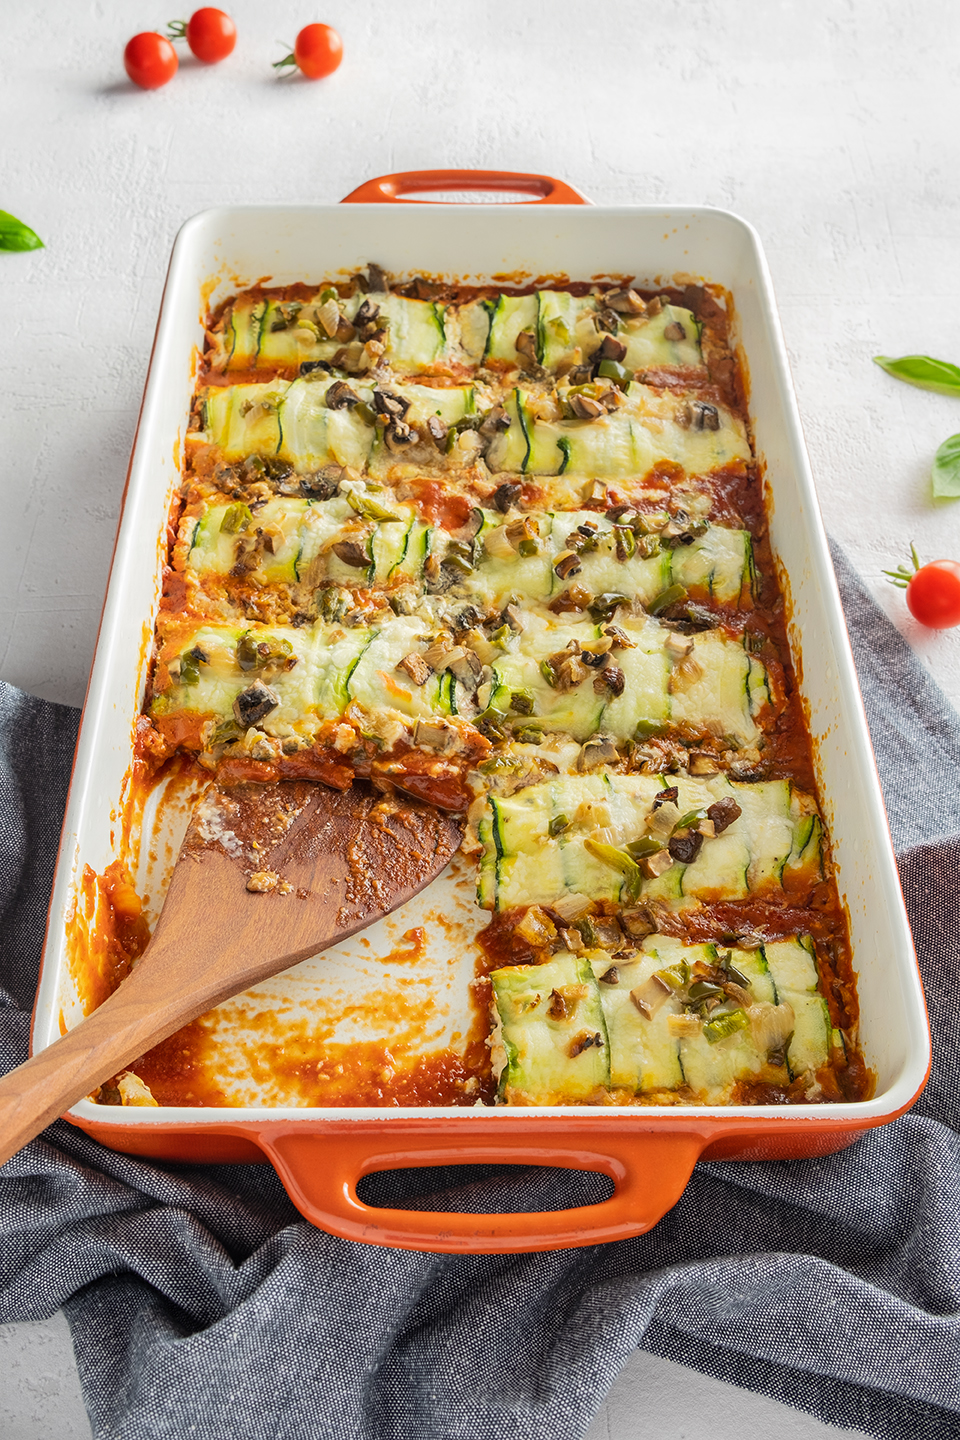  Low carb zucchini and ricotta cannelloni in a orange baking dish.  Cherry tomatoes, basil and blue napkin on a white background.  